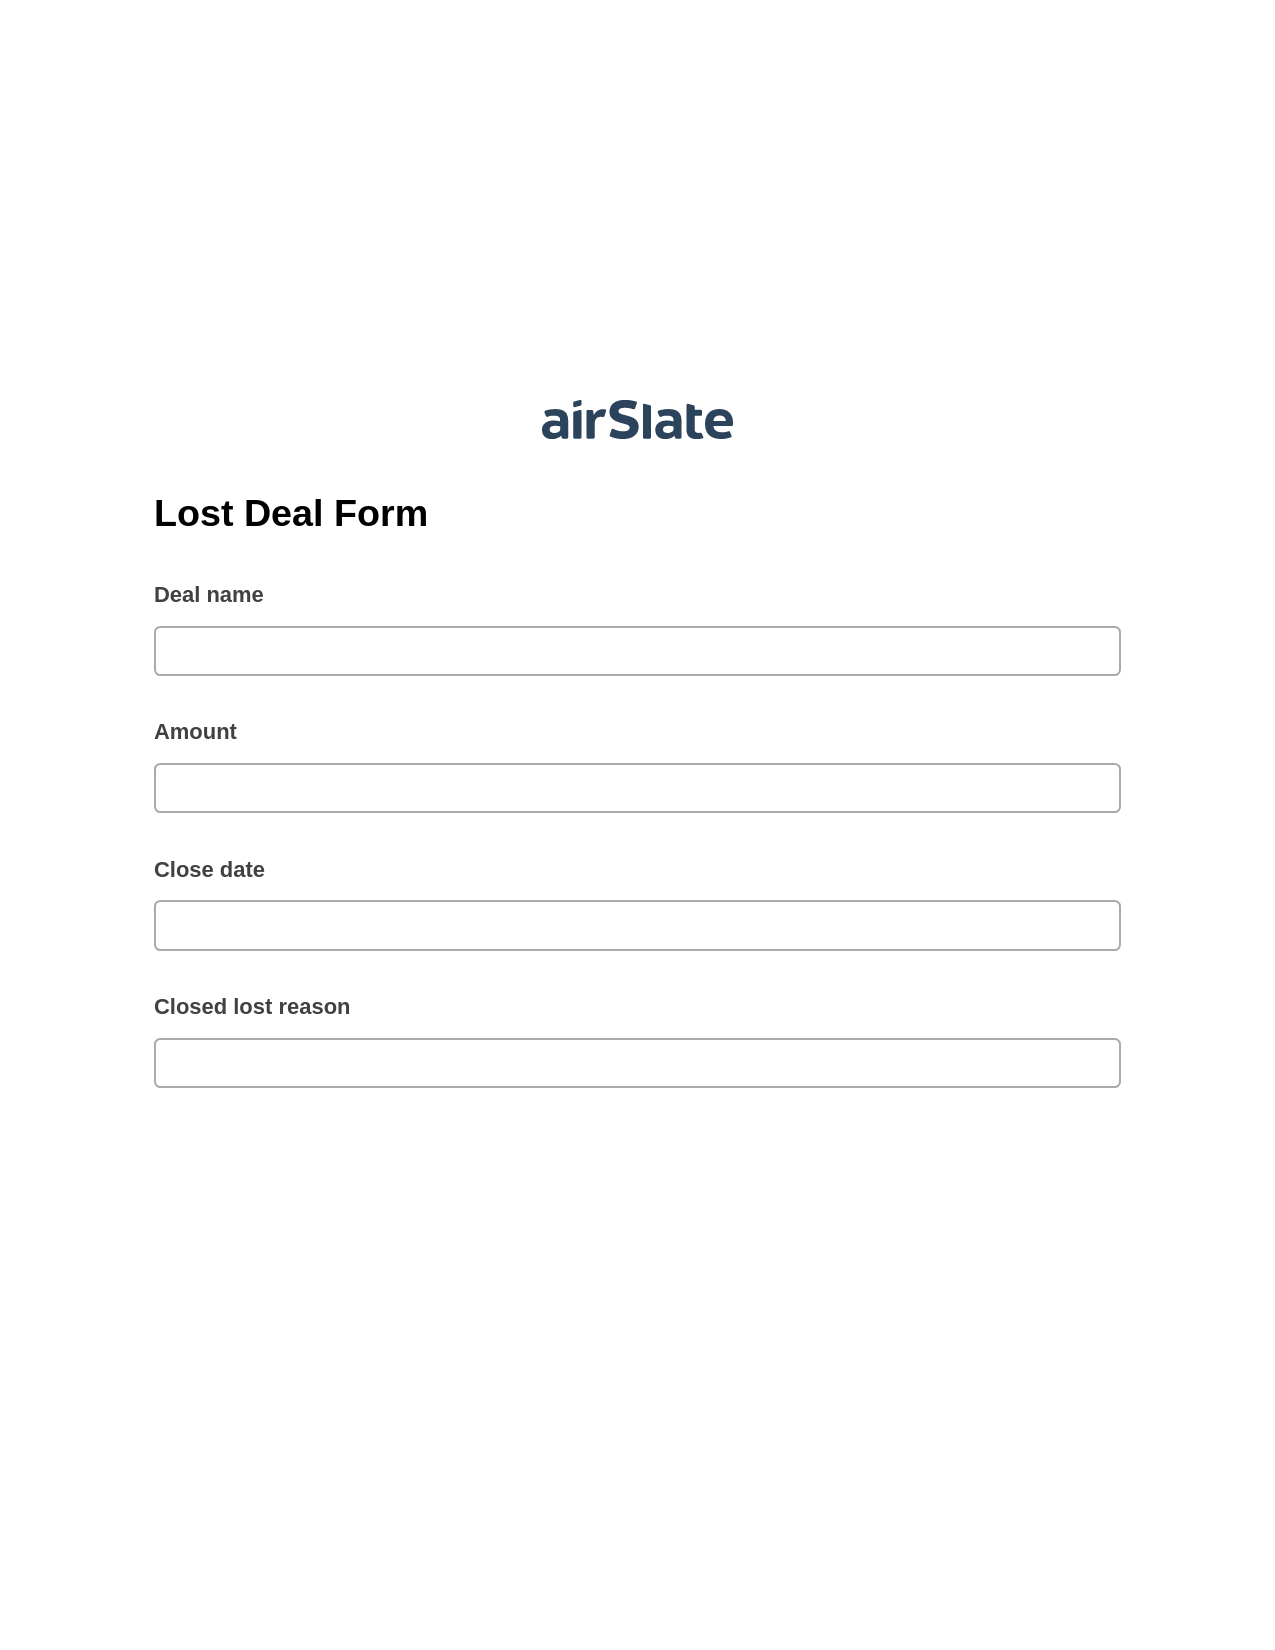 Lost Deal Form Pre-fill Document Bot, Reminder Bot, Export to Google Sheet Bot